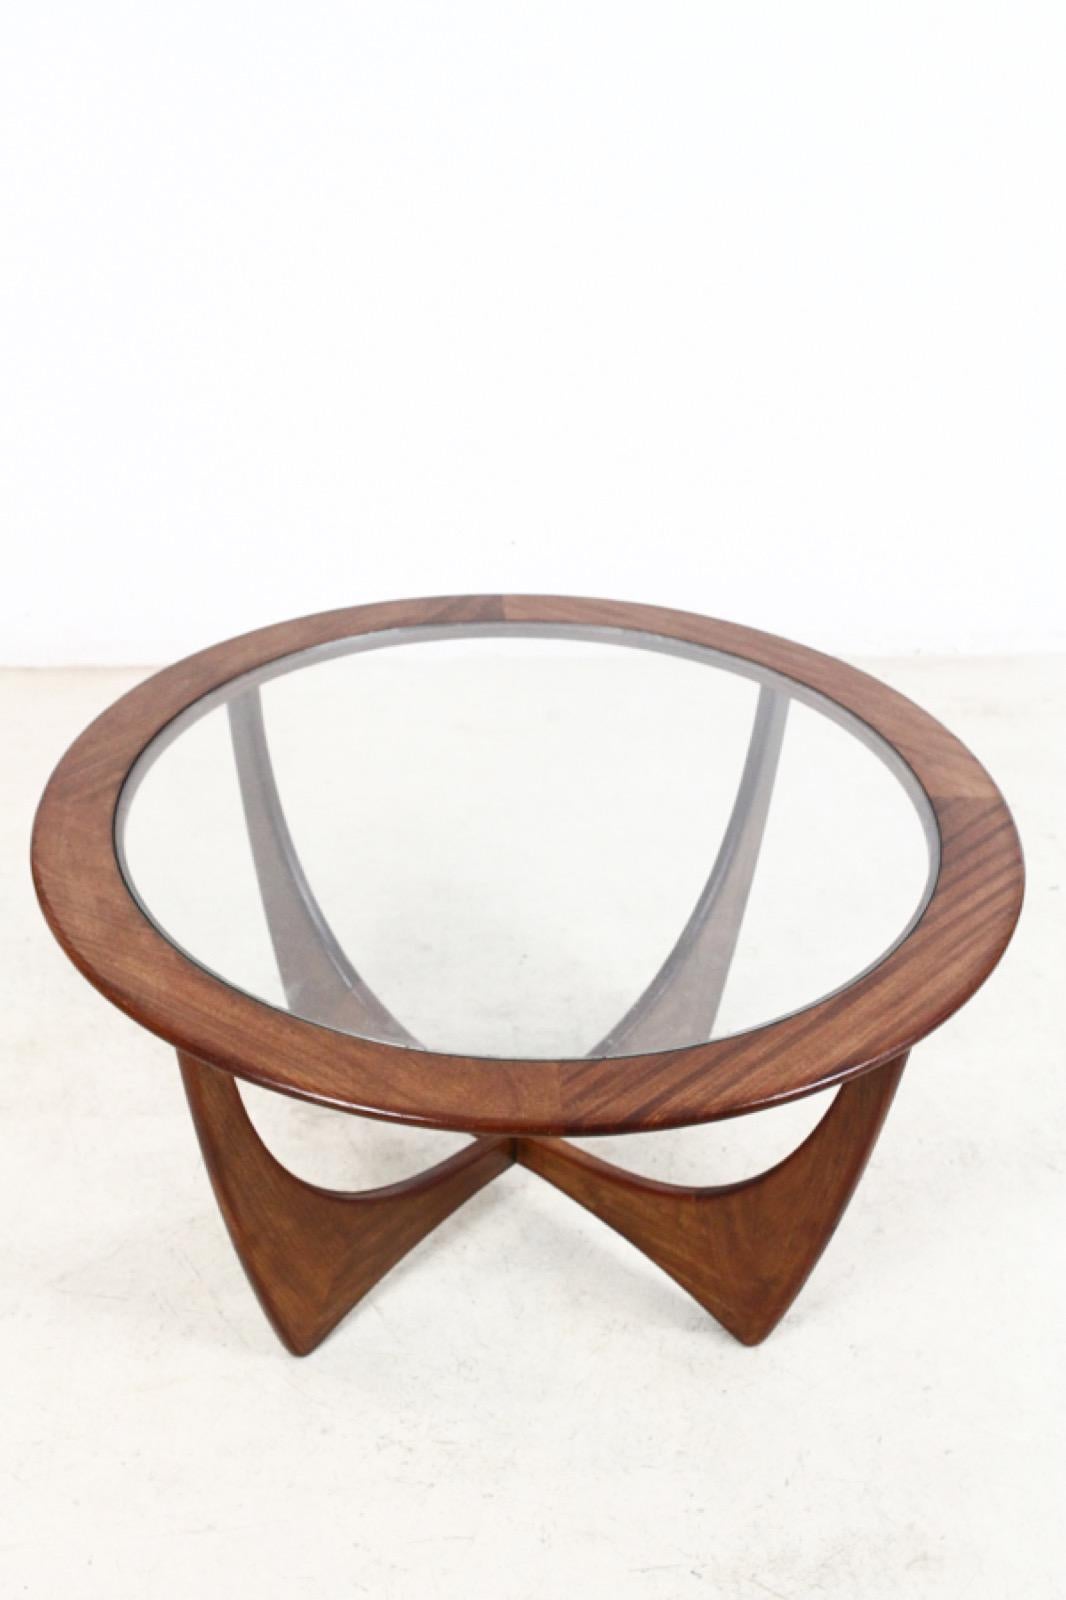 This model Astro round stained teak and glass coffee table was designed by Victor Wilkins for G-Plan and was produced in England, circa 1960s. It is made from teak with a glass top and remains in a very good vintage condition. If you ever wondered